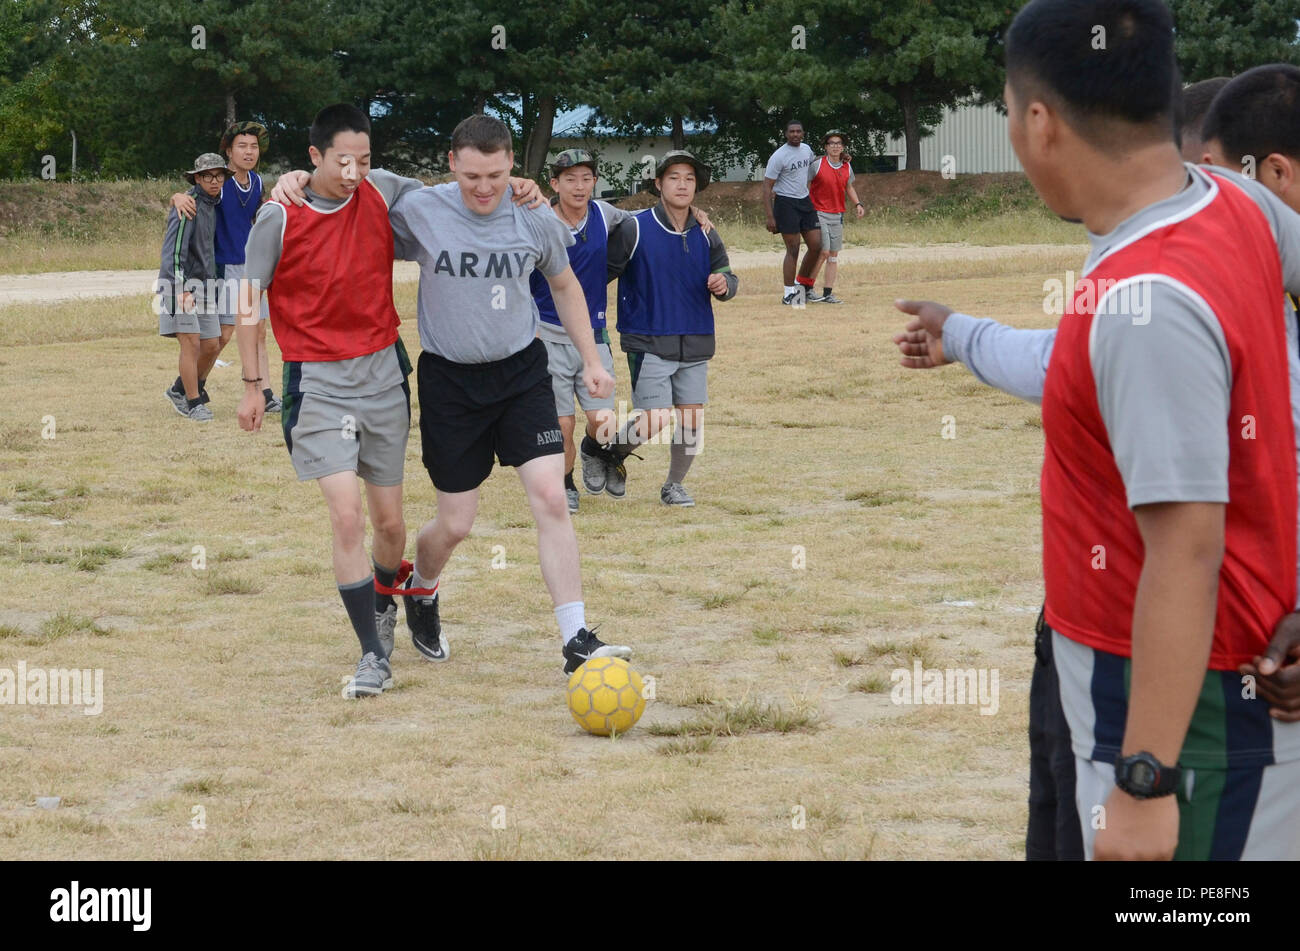 Spc. Benjamin Schoonover, a combat engineer from Bethany, Ill., assigned to Bravo Company, 8th Brigade Engineer Battalion, 2nd Armored Brigade Combat Team, 1st Cavalry Division, participates in a game of 3-legged soccer while tied to a soldier from the Republic of Korea Army’s 1-58th Engineer Battalion, Bucheon, South Korea, Sept. 30, 2015. (U.S. Army photo by Staff Sgt. John Healy, 2ABCT PAO, 1st Cavalry Division) Stock Photo